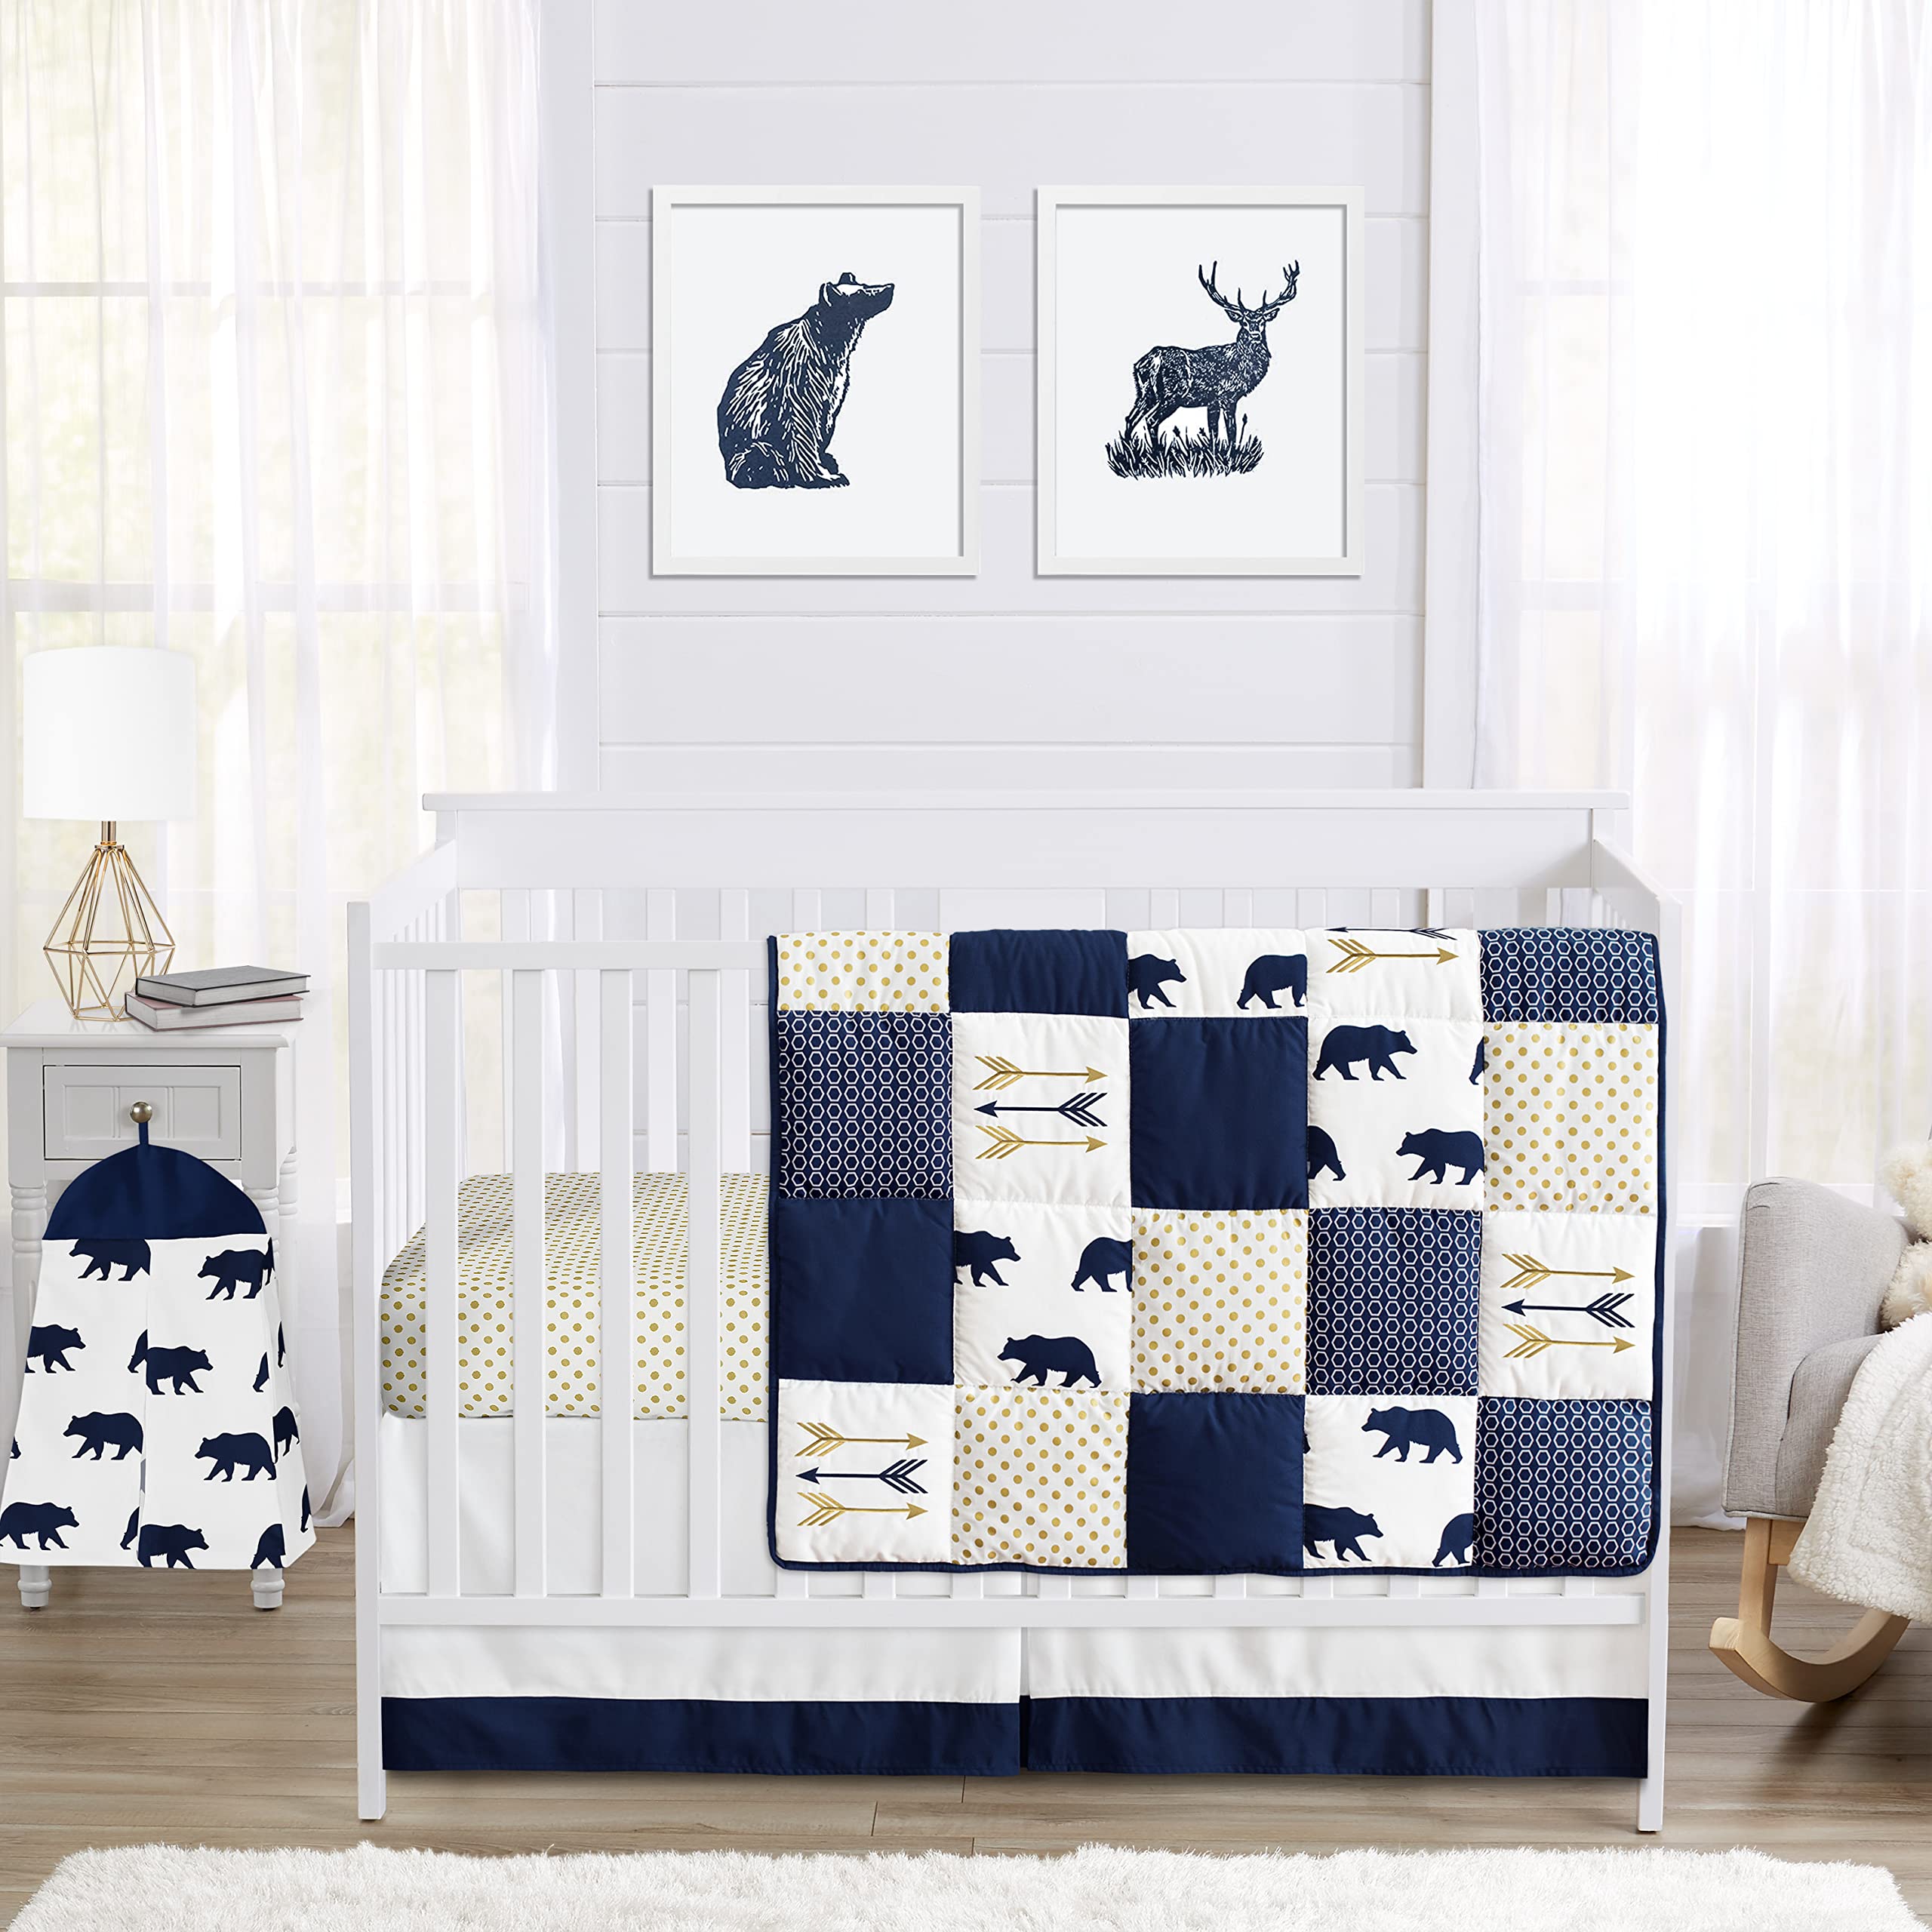 Sweet Jojo Designs Woodland Bear Boy Baby Playmat Tummy Time Infant Play Mat - Navy Blue and White